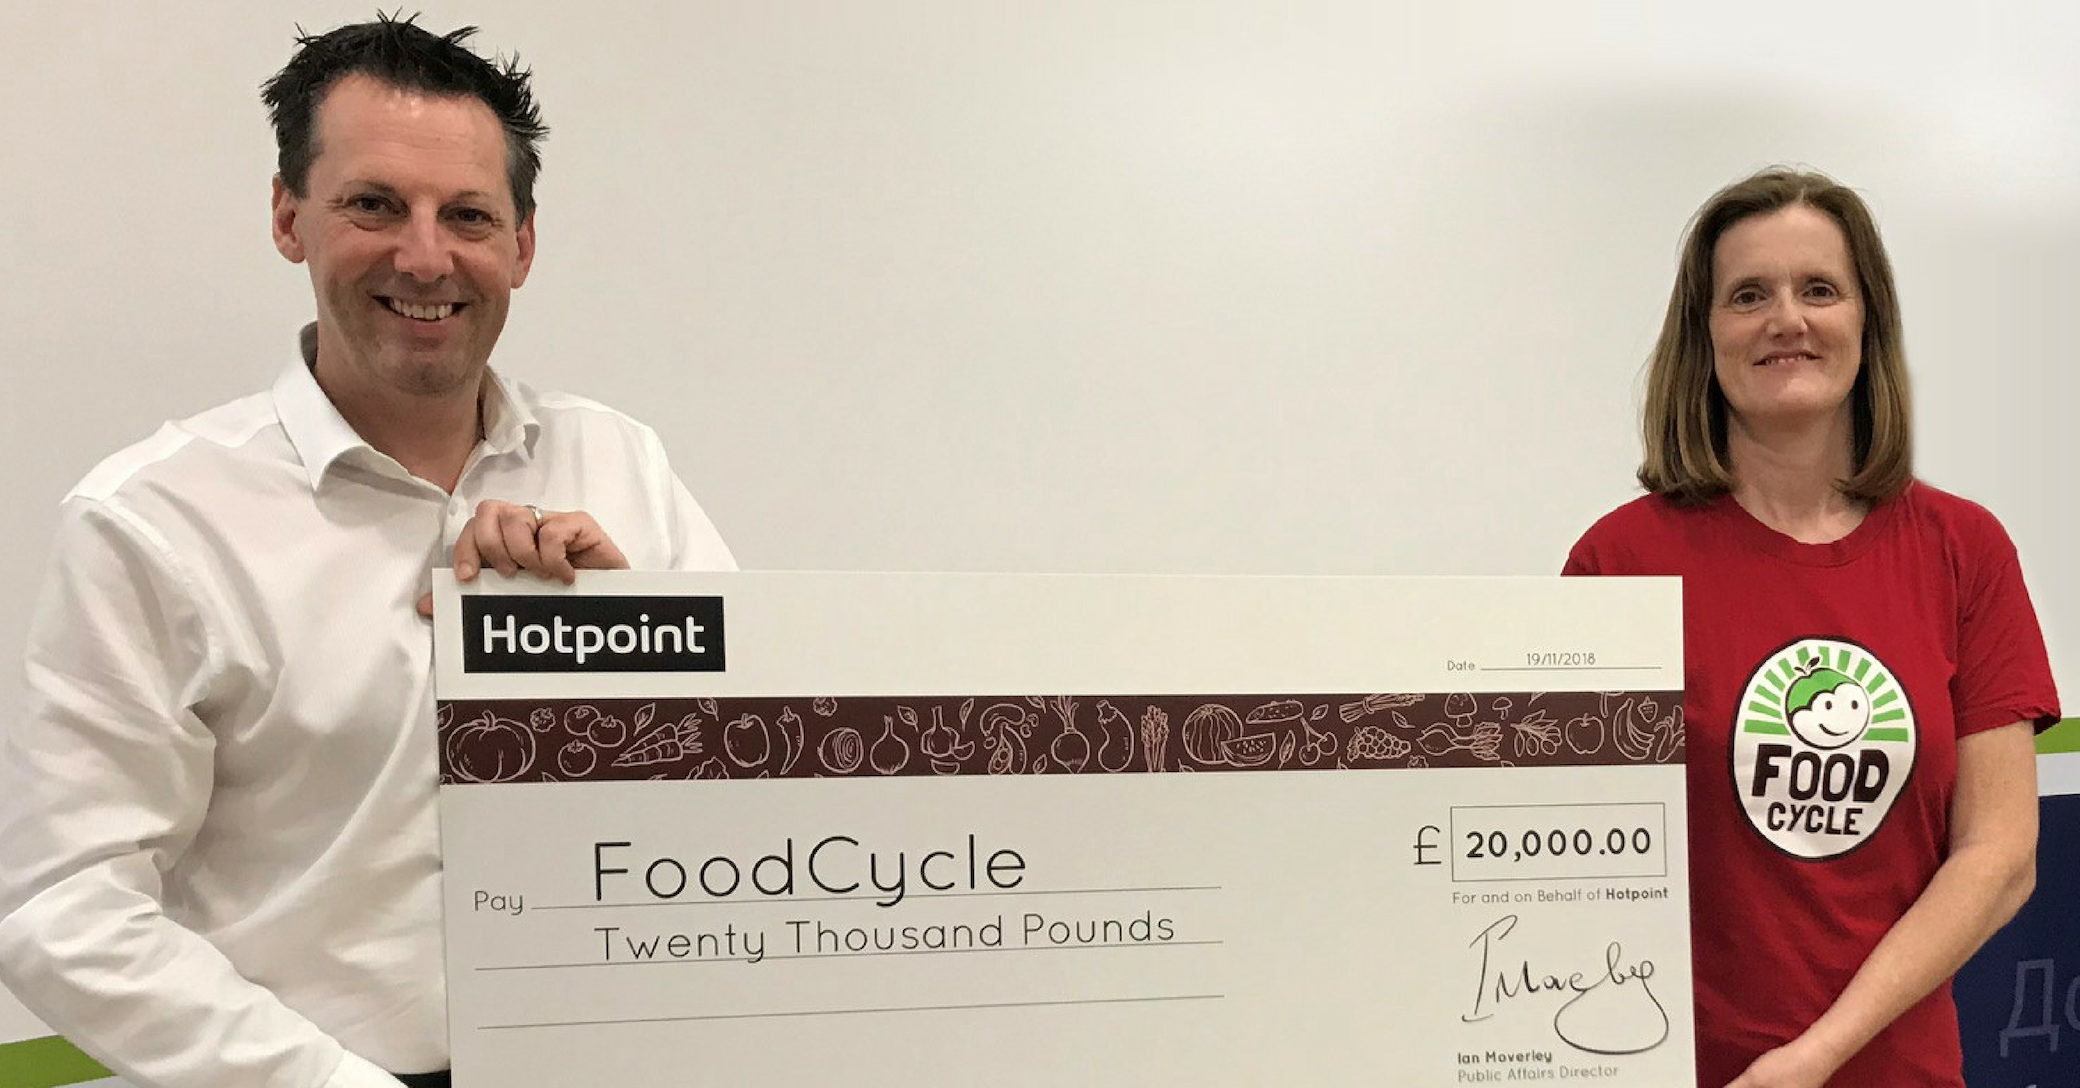 Hotpoint raises £20,000 for FoodCycle